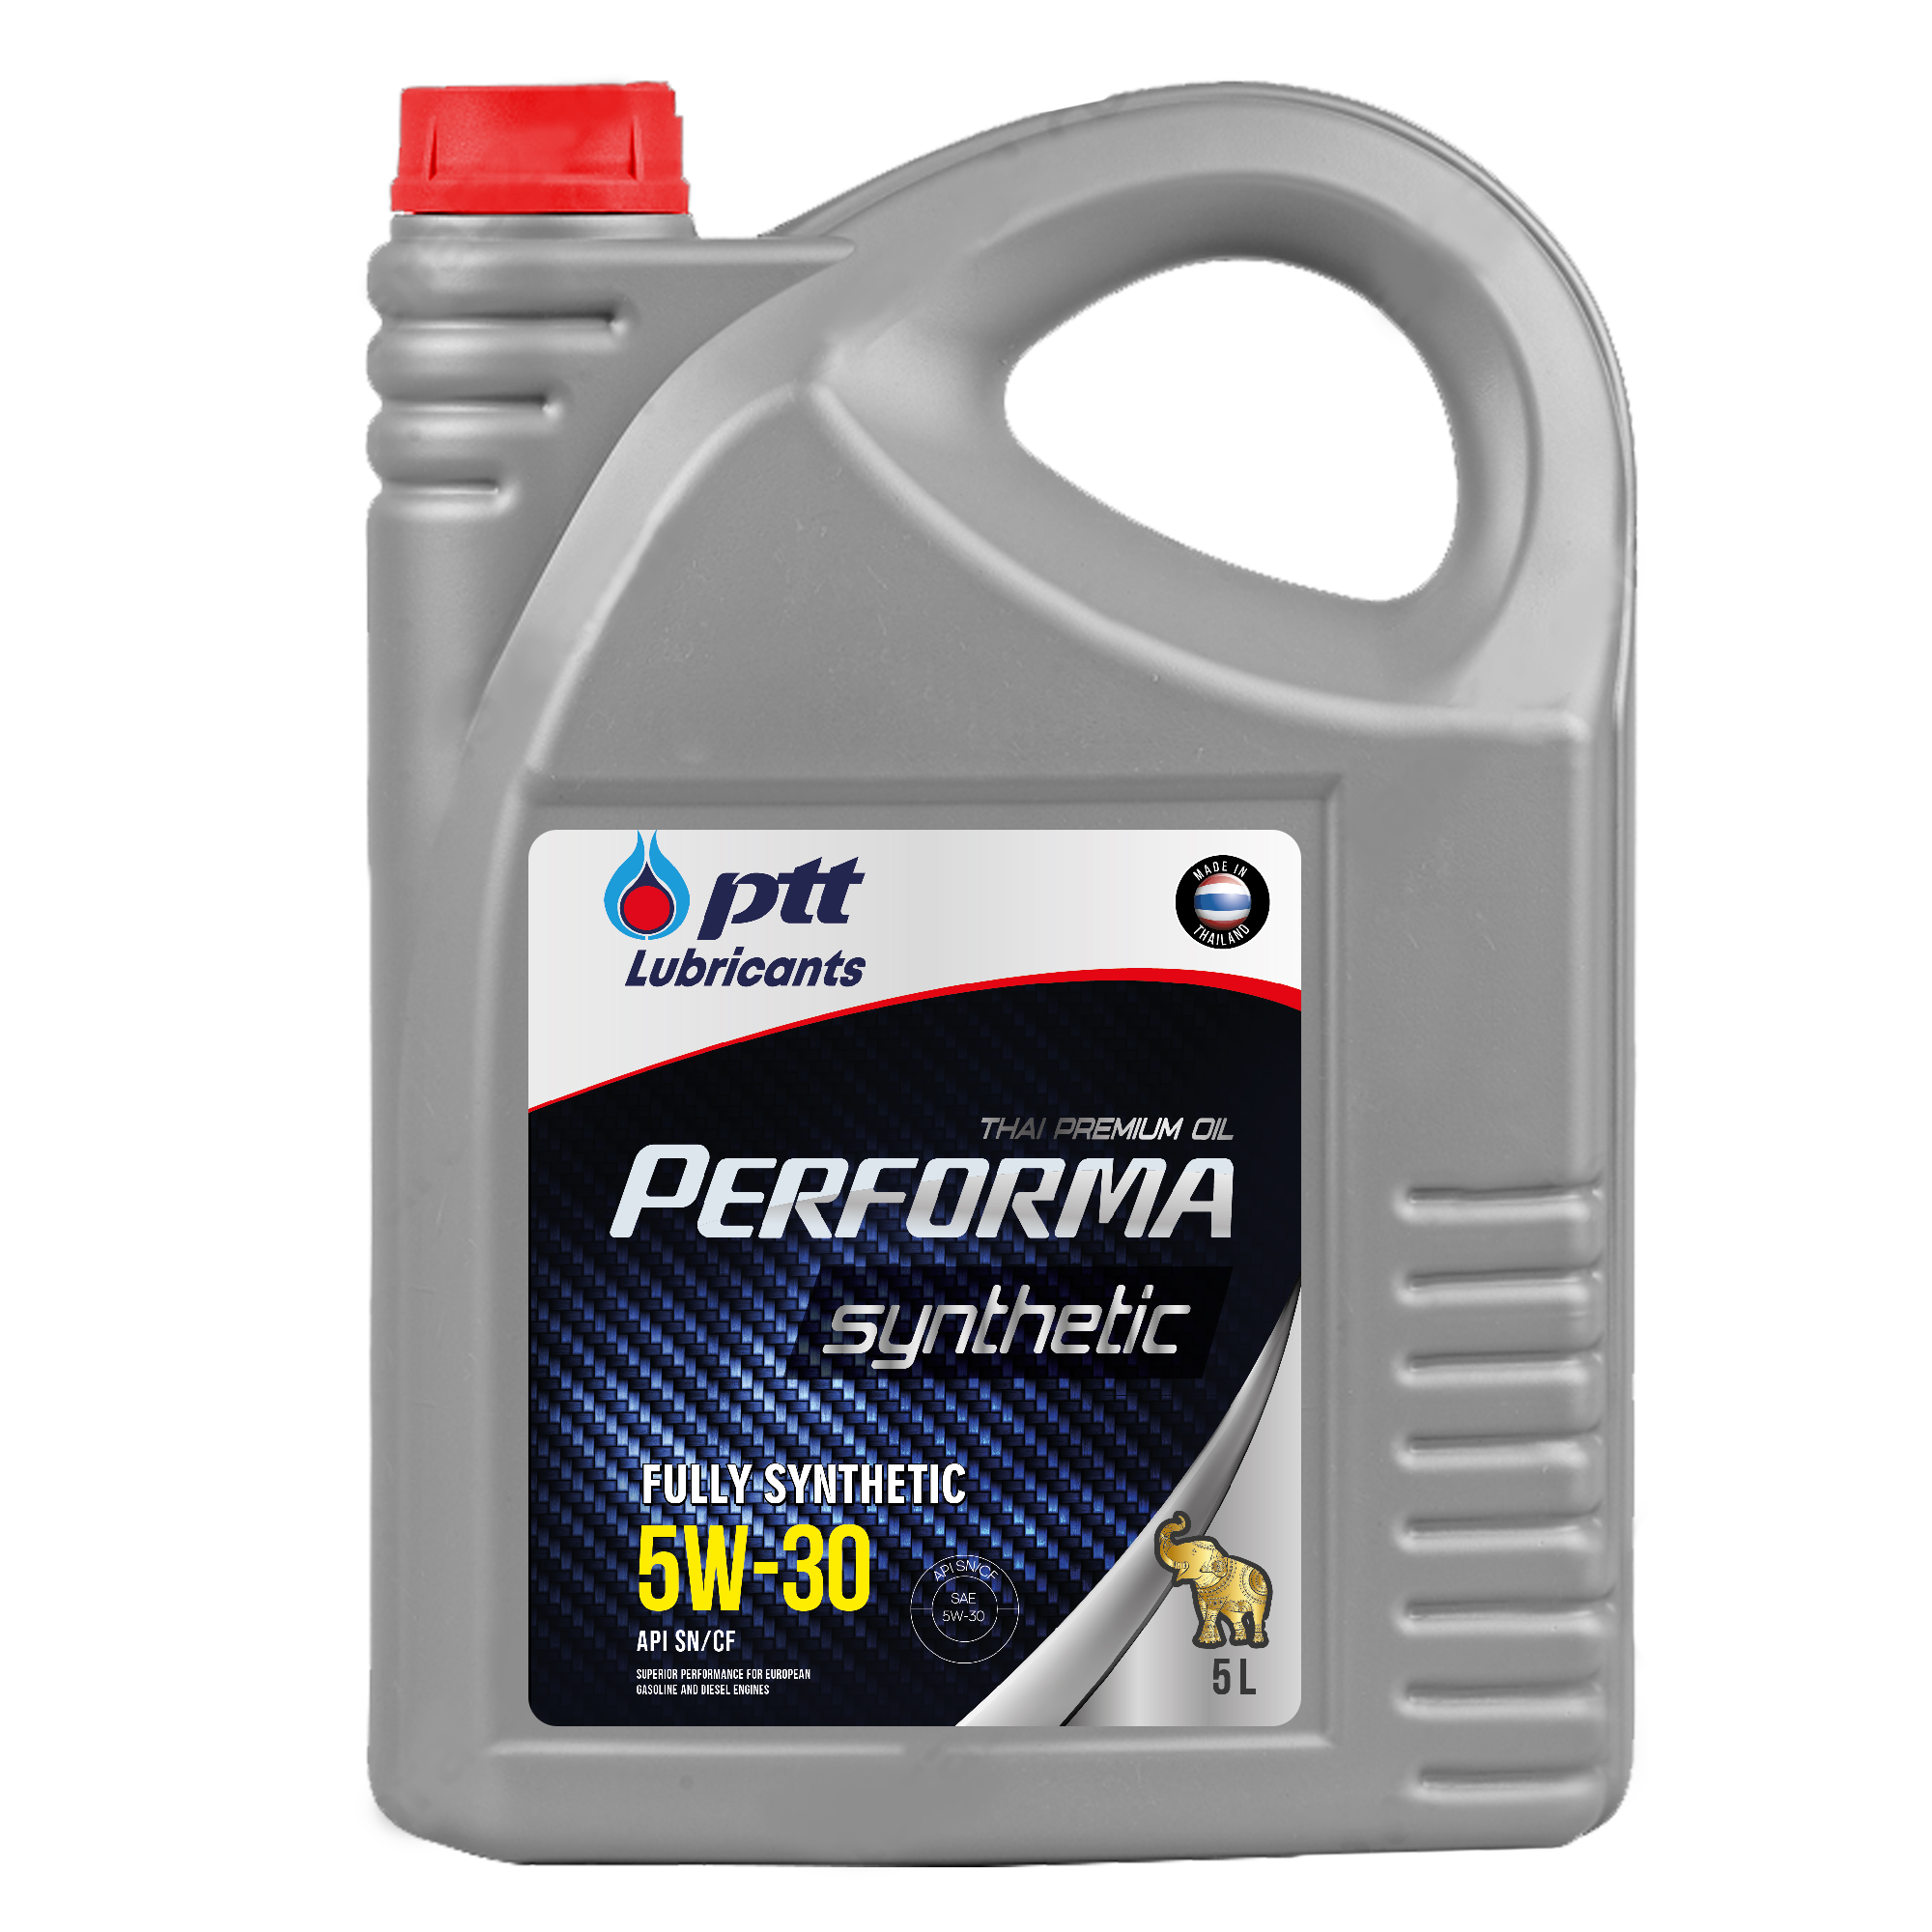 Моторное масло PTT Lubricants Performa Synthetic 5W30